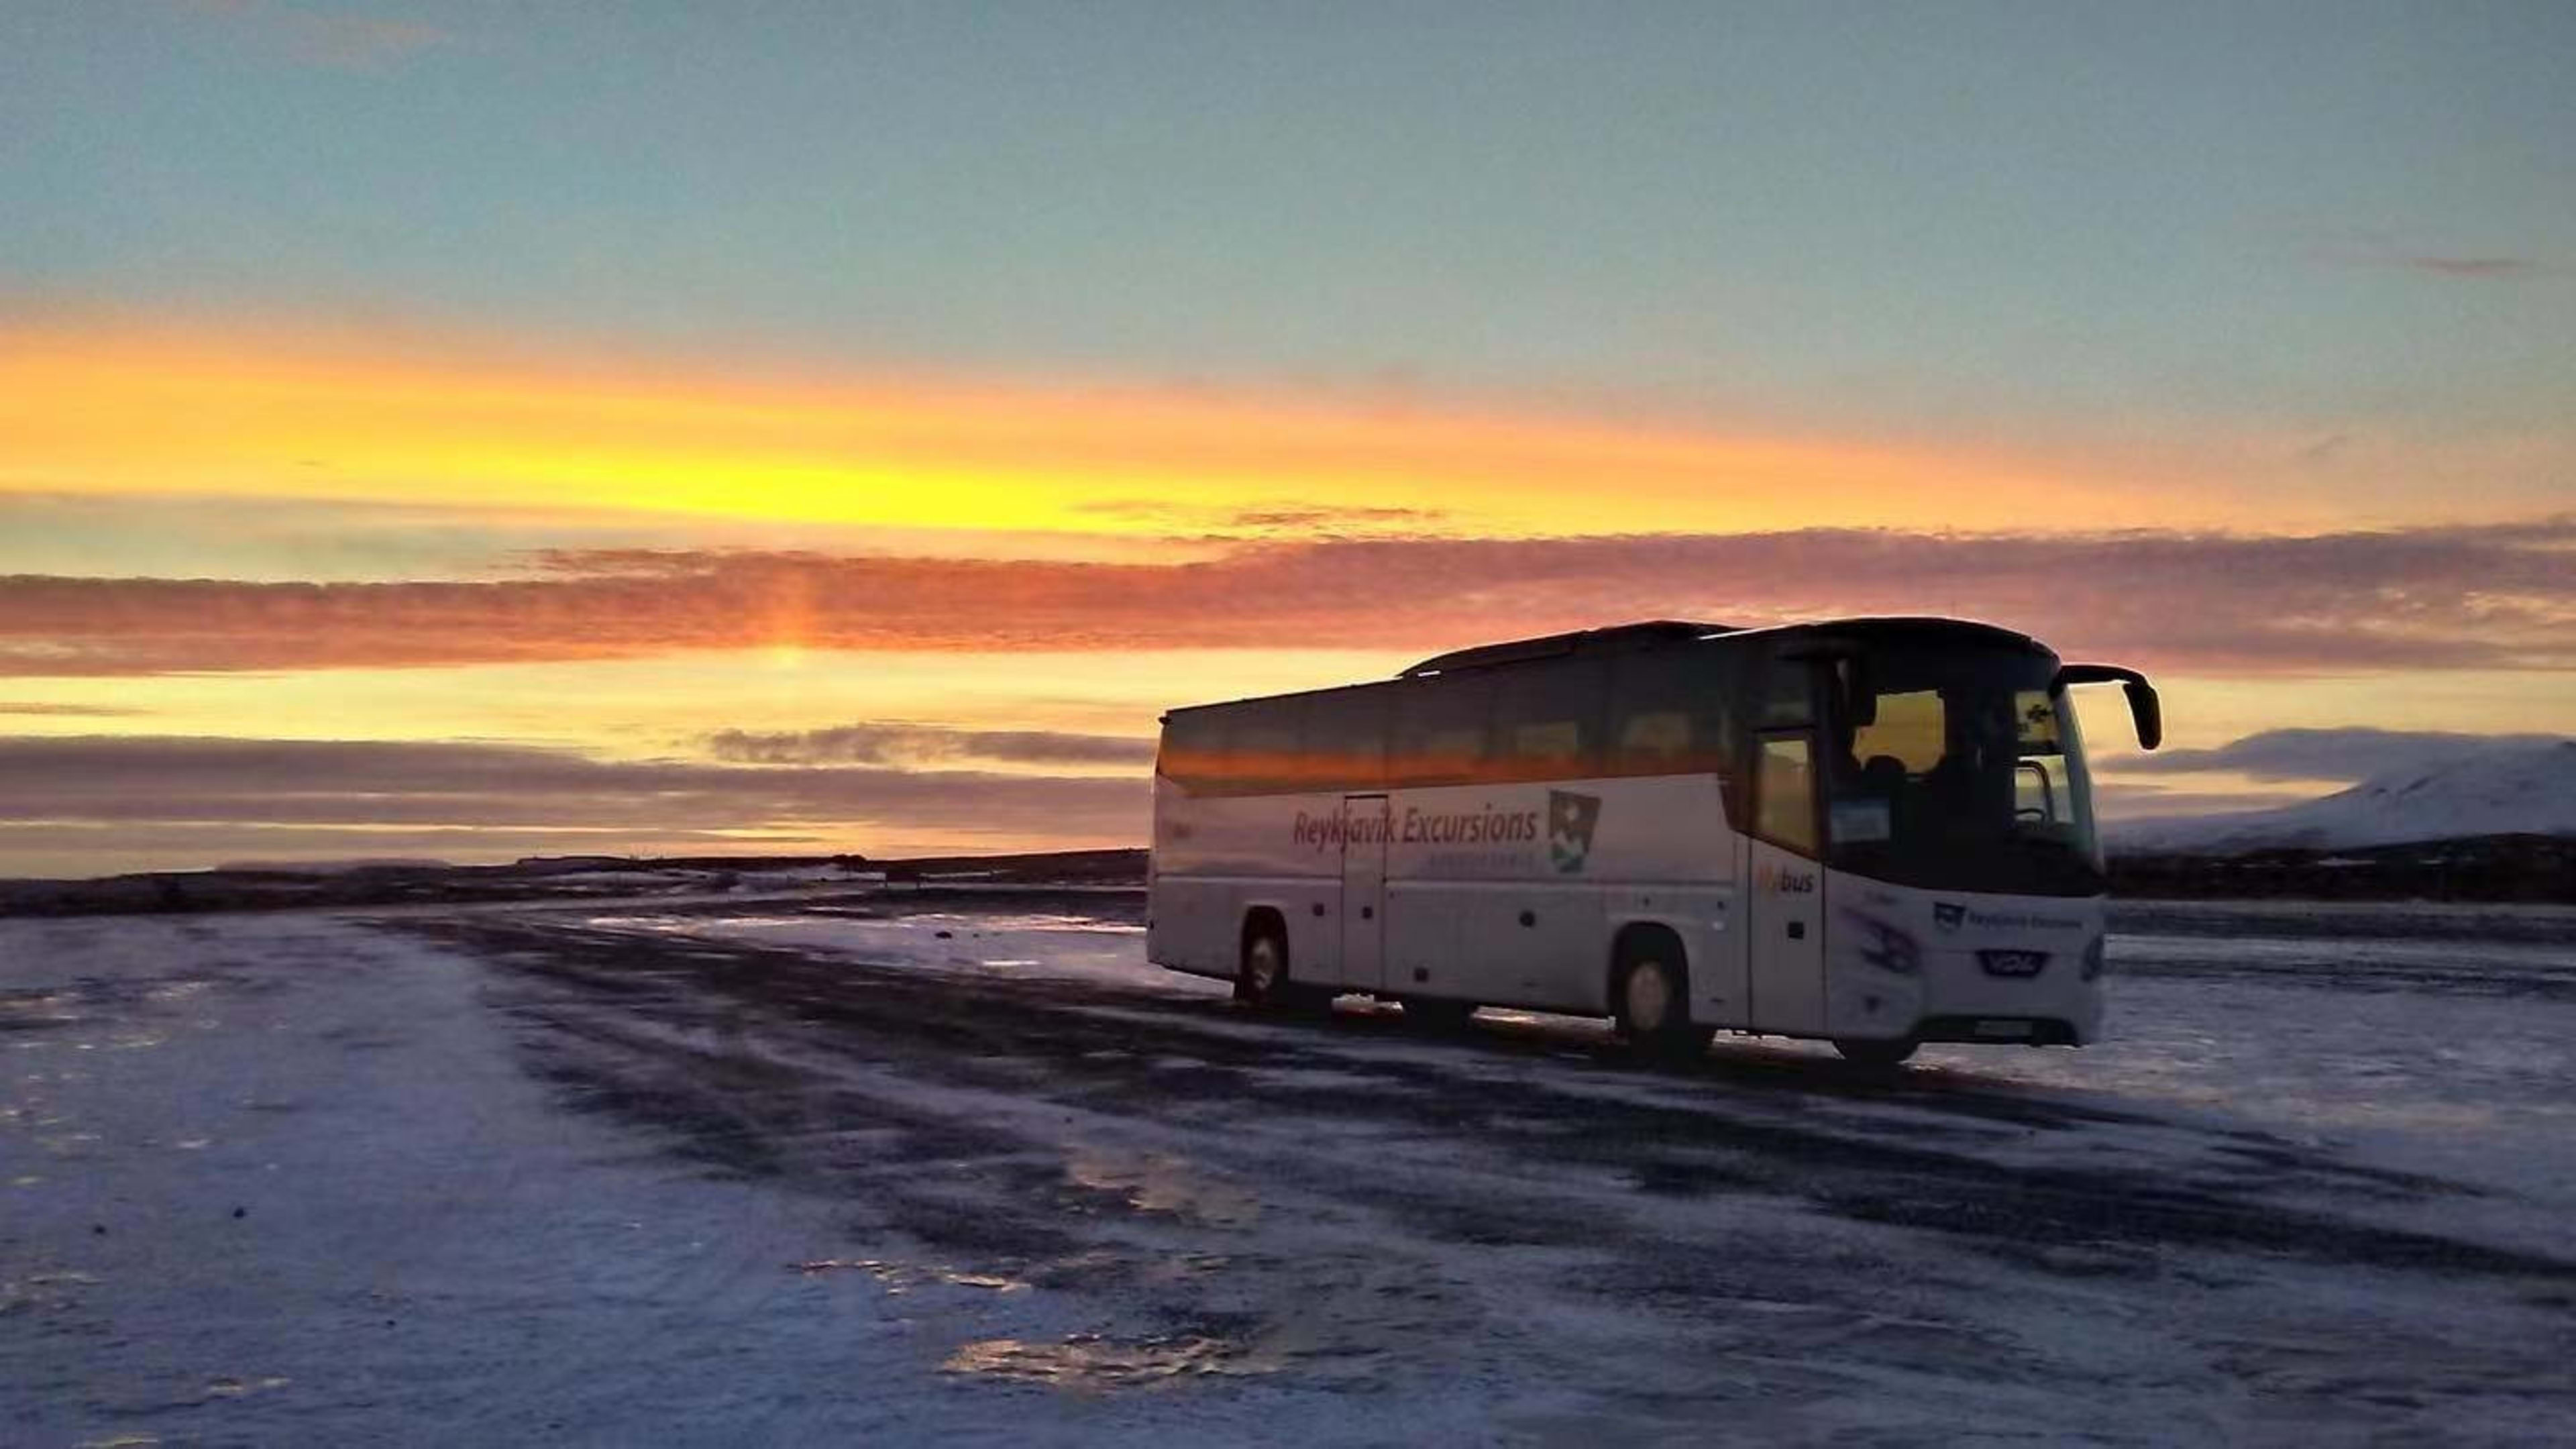 flybus at sunset